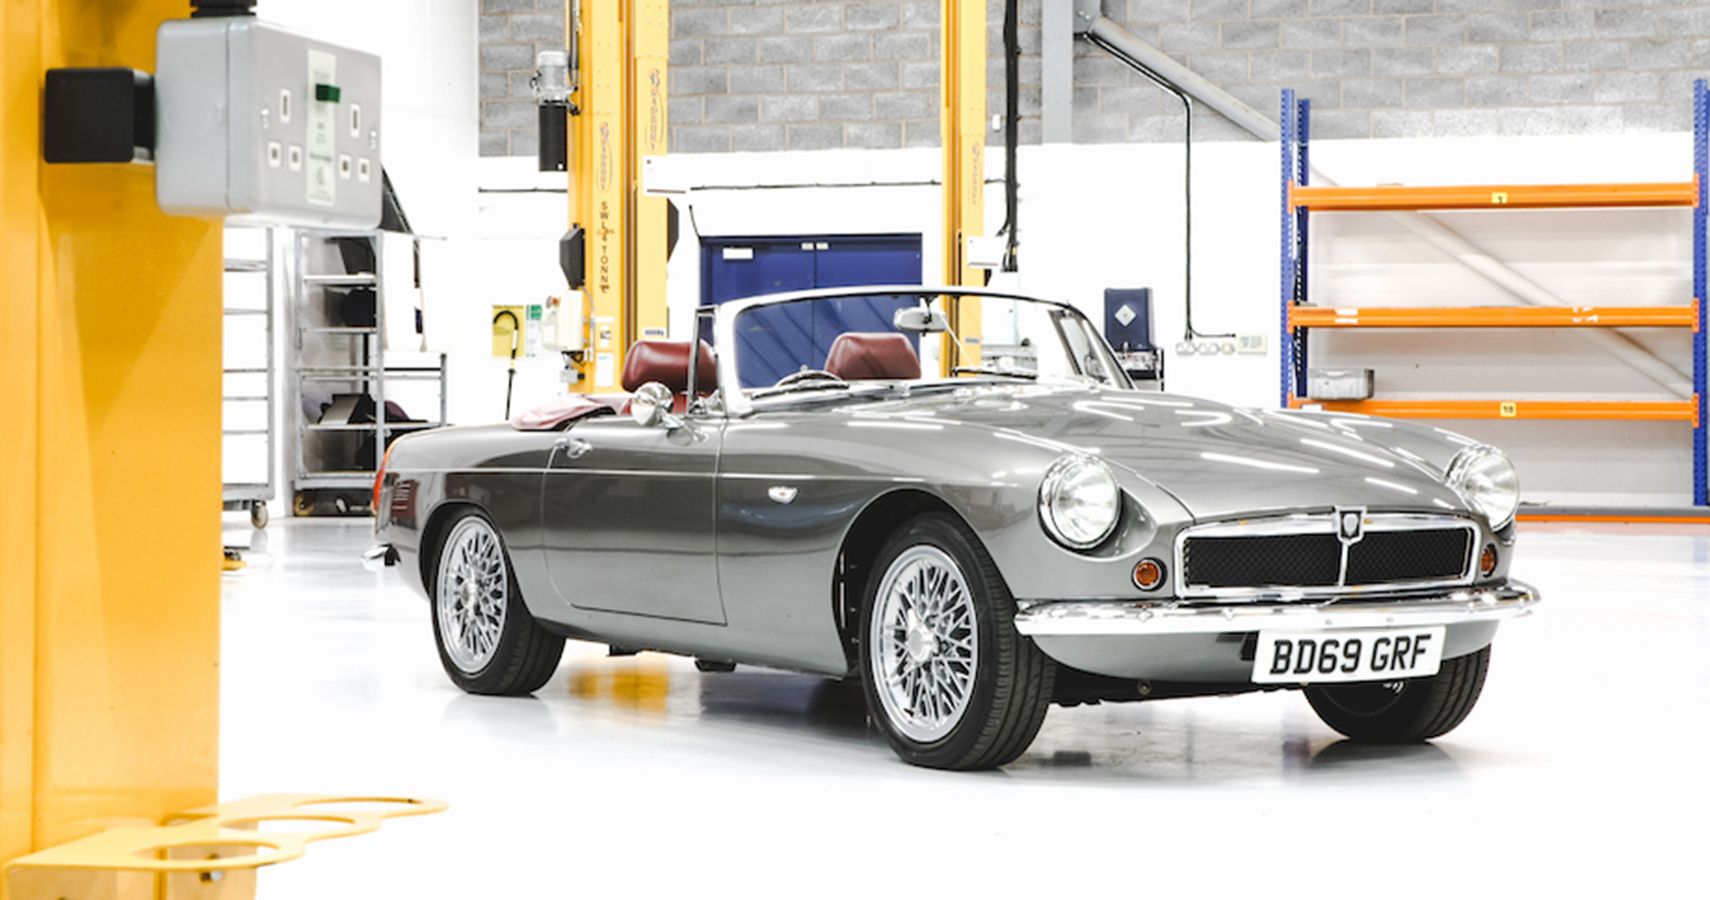 RBW Resurrects 1960s MGB Roadsters Into Modern Electric Classic Cars